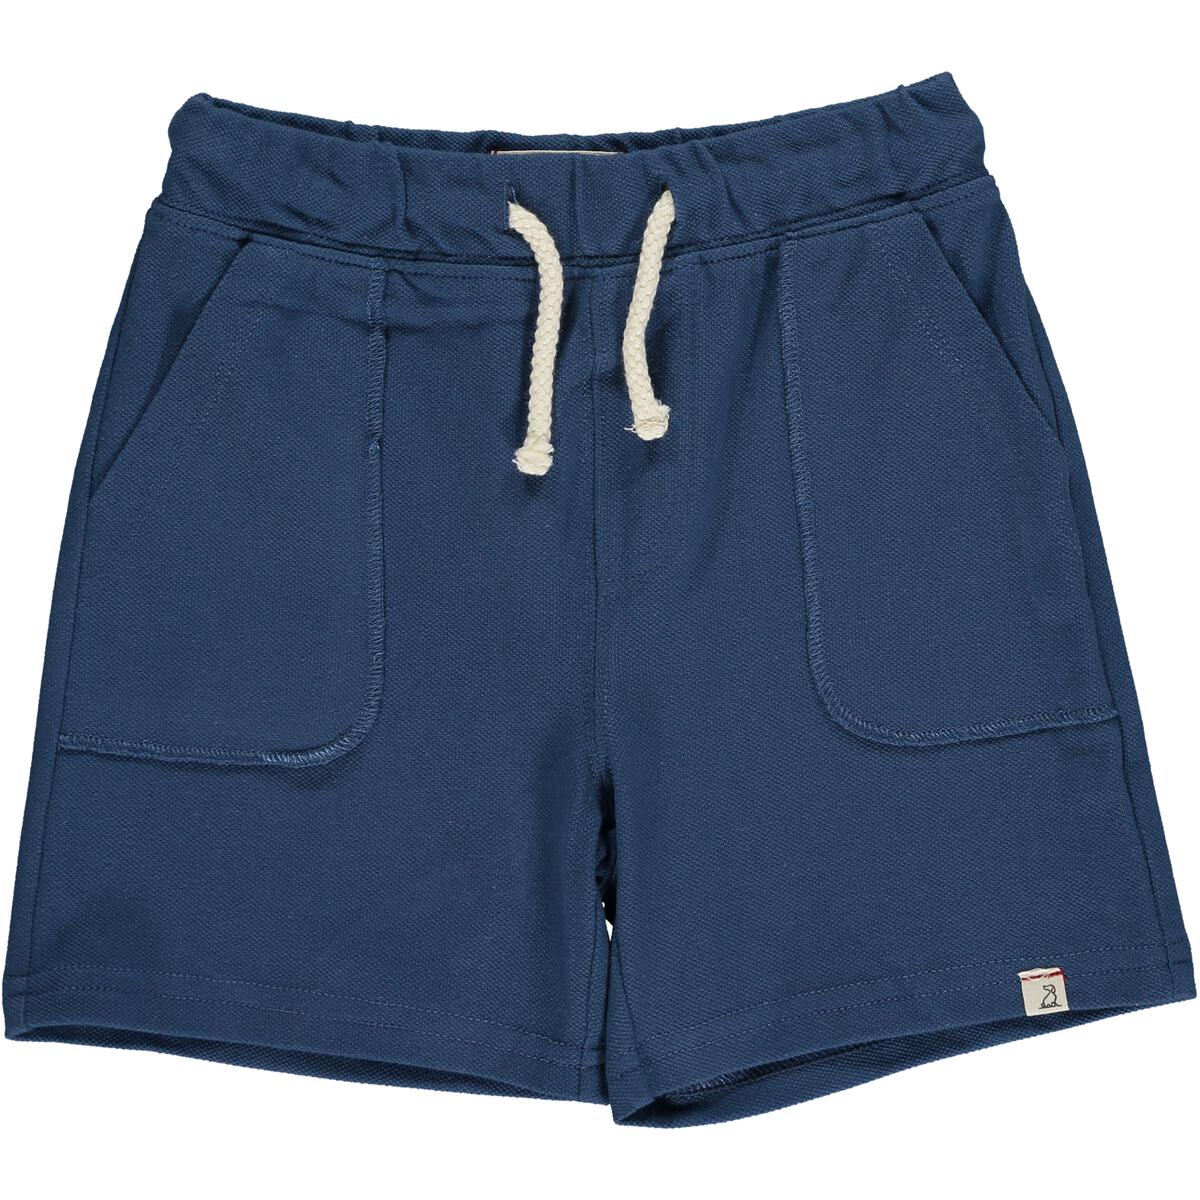 Me & Henry Timothy Pique Shorts in Navy